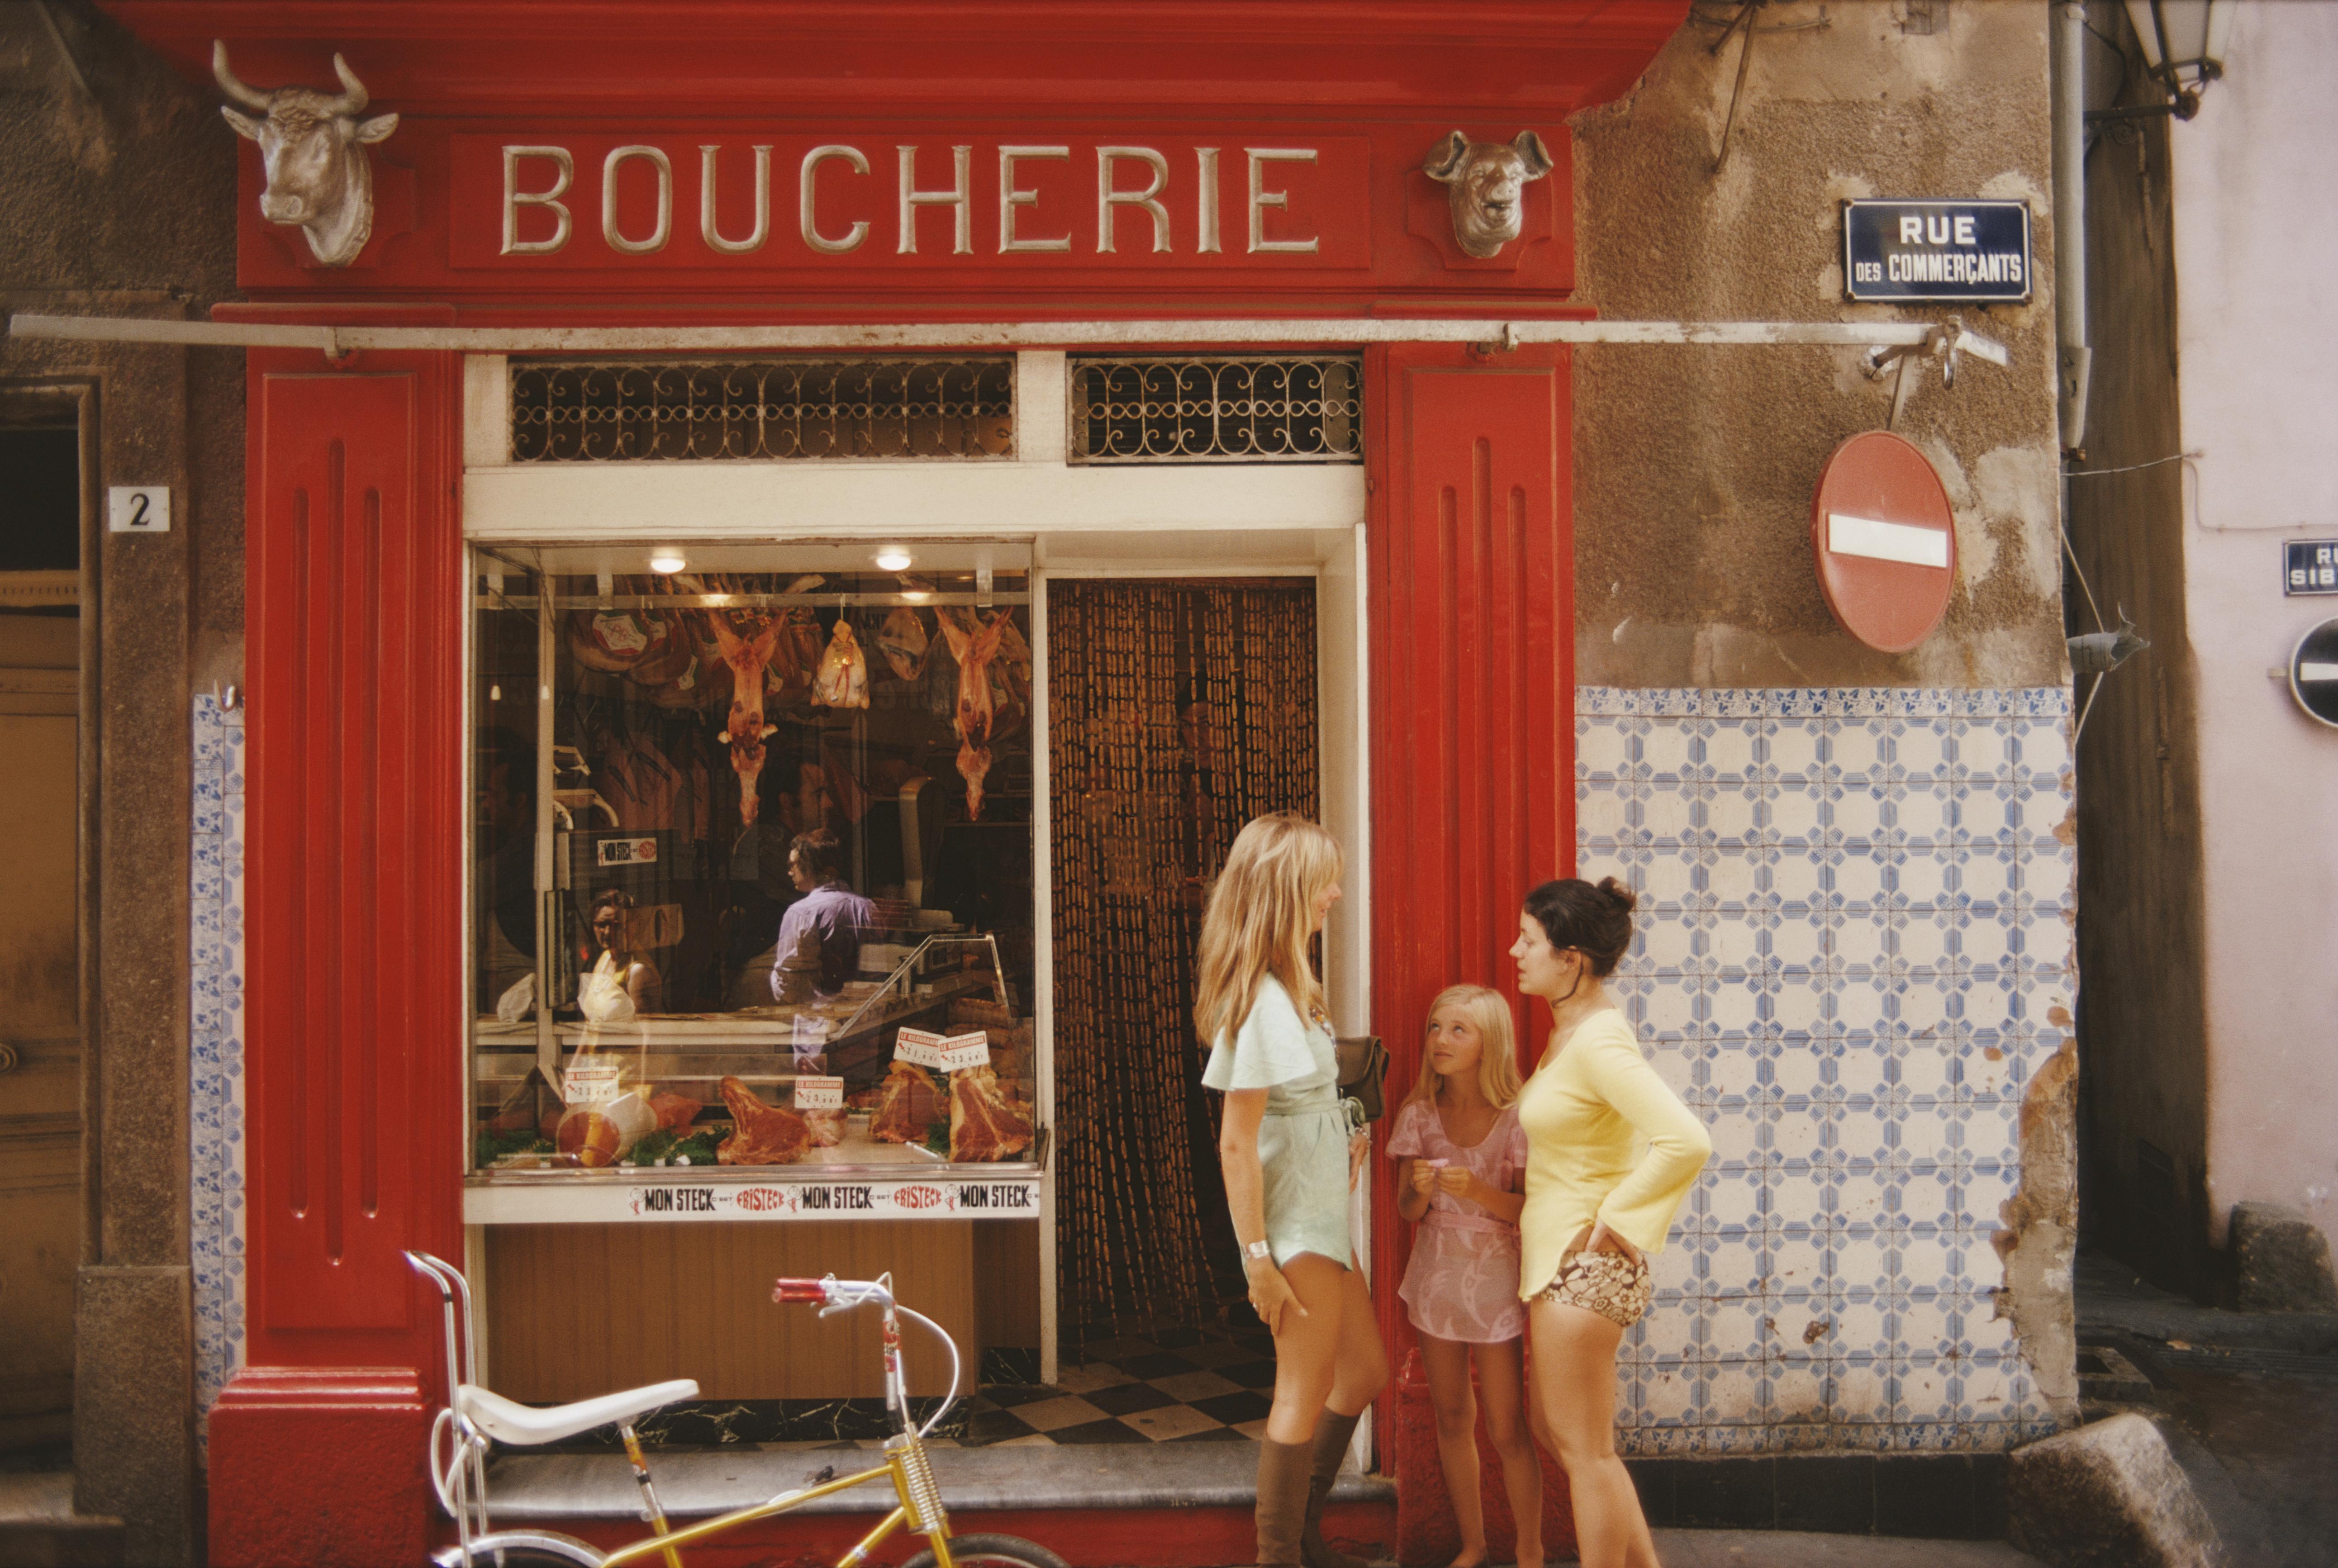 Slim Aarons
Saint-Tropez Boucherie
1971. (printed later)
C print 
Estate stamped and numbered edition of 150 
with Certificate of authenticity

A boucherie or butcher's shop on Rue des Commercants in Saint-Tropez, on the French Riviera, August